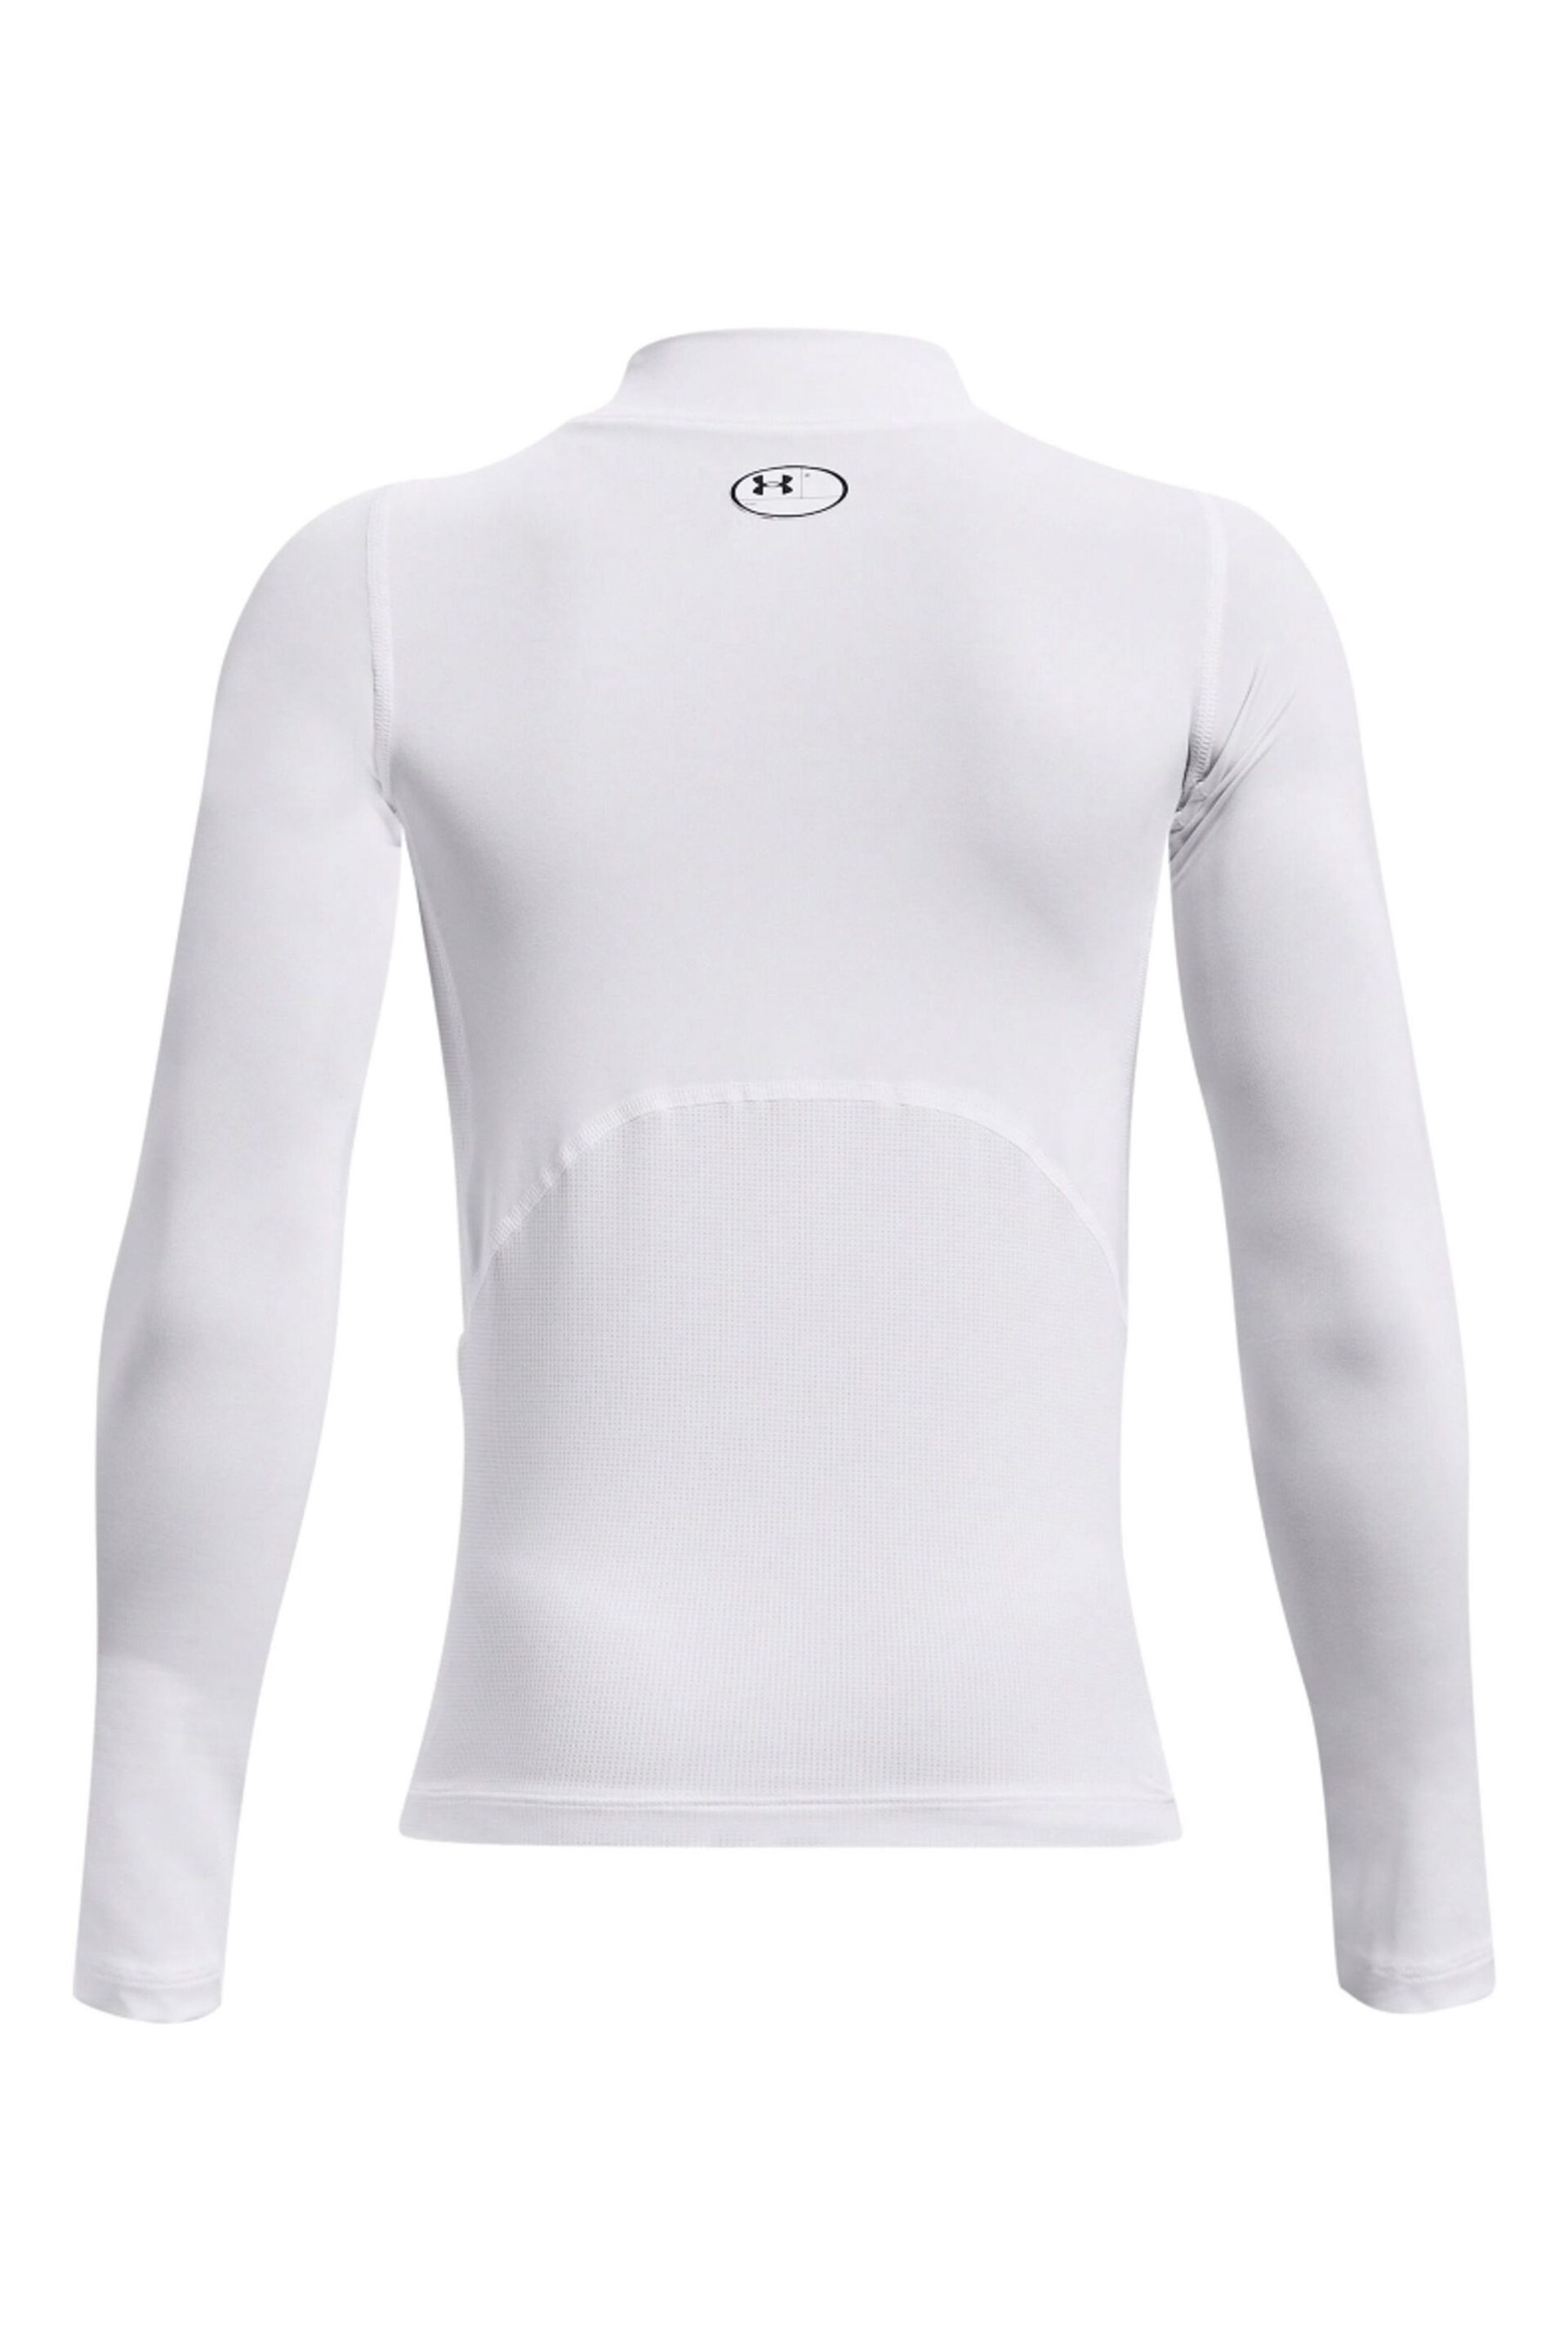 Under Armour White Youth Heat Gear Armour Mock Long Sleeve T-Shirt - Image 1 of 2